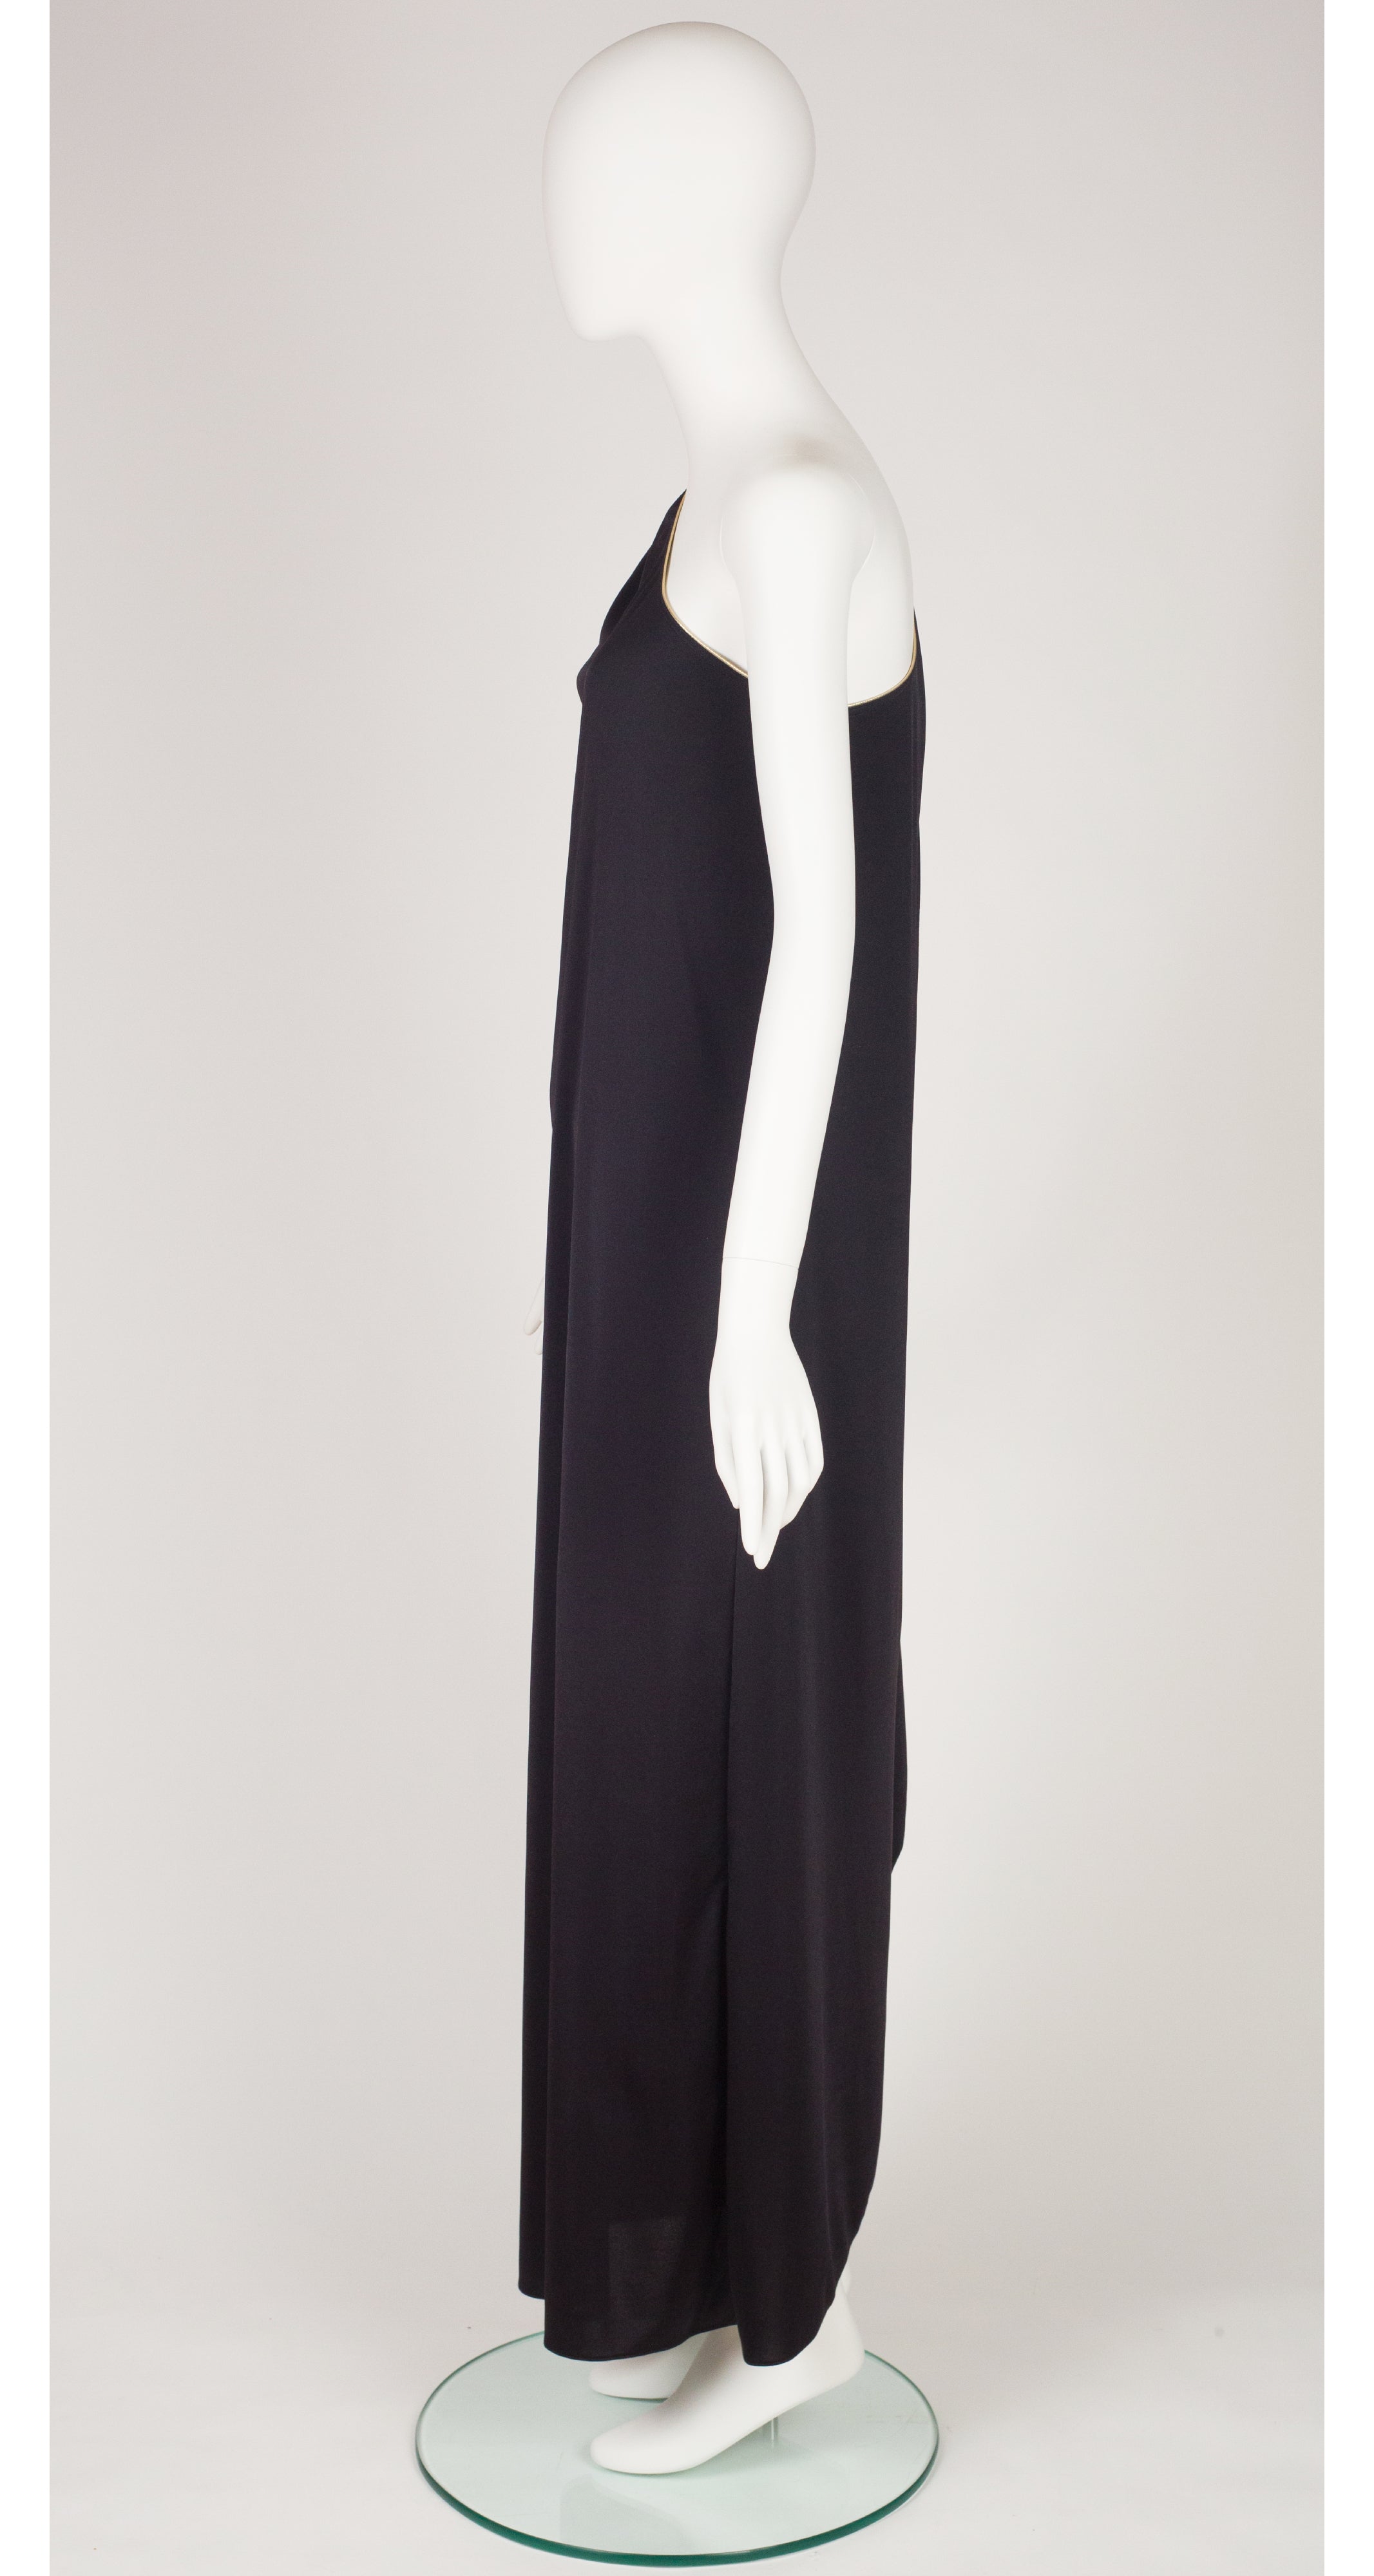 1981 Black Jersey Draped One-Shoulder Gown